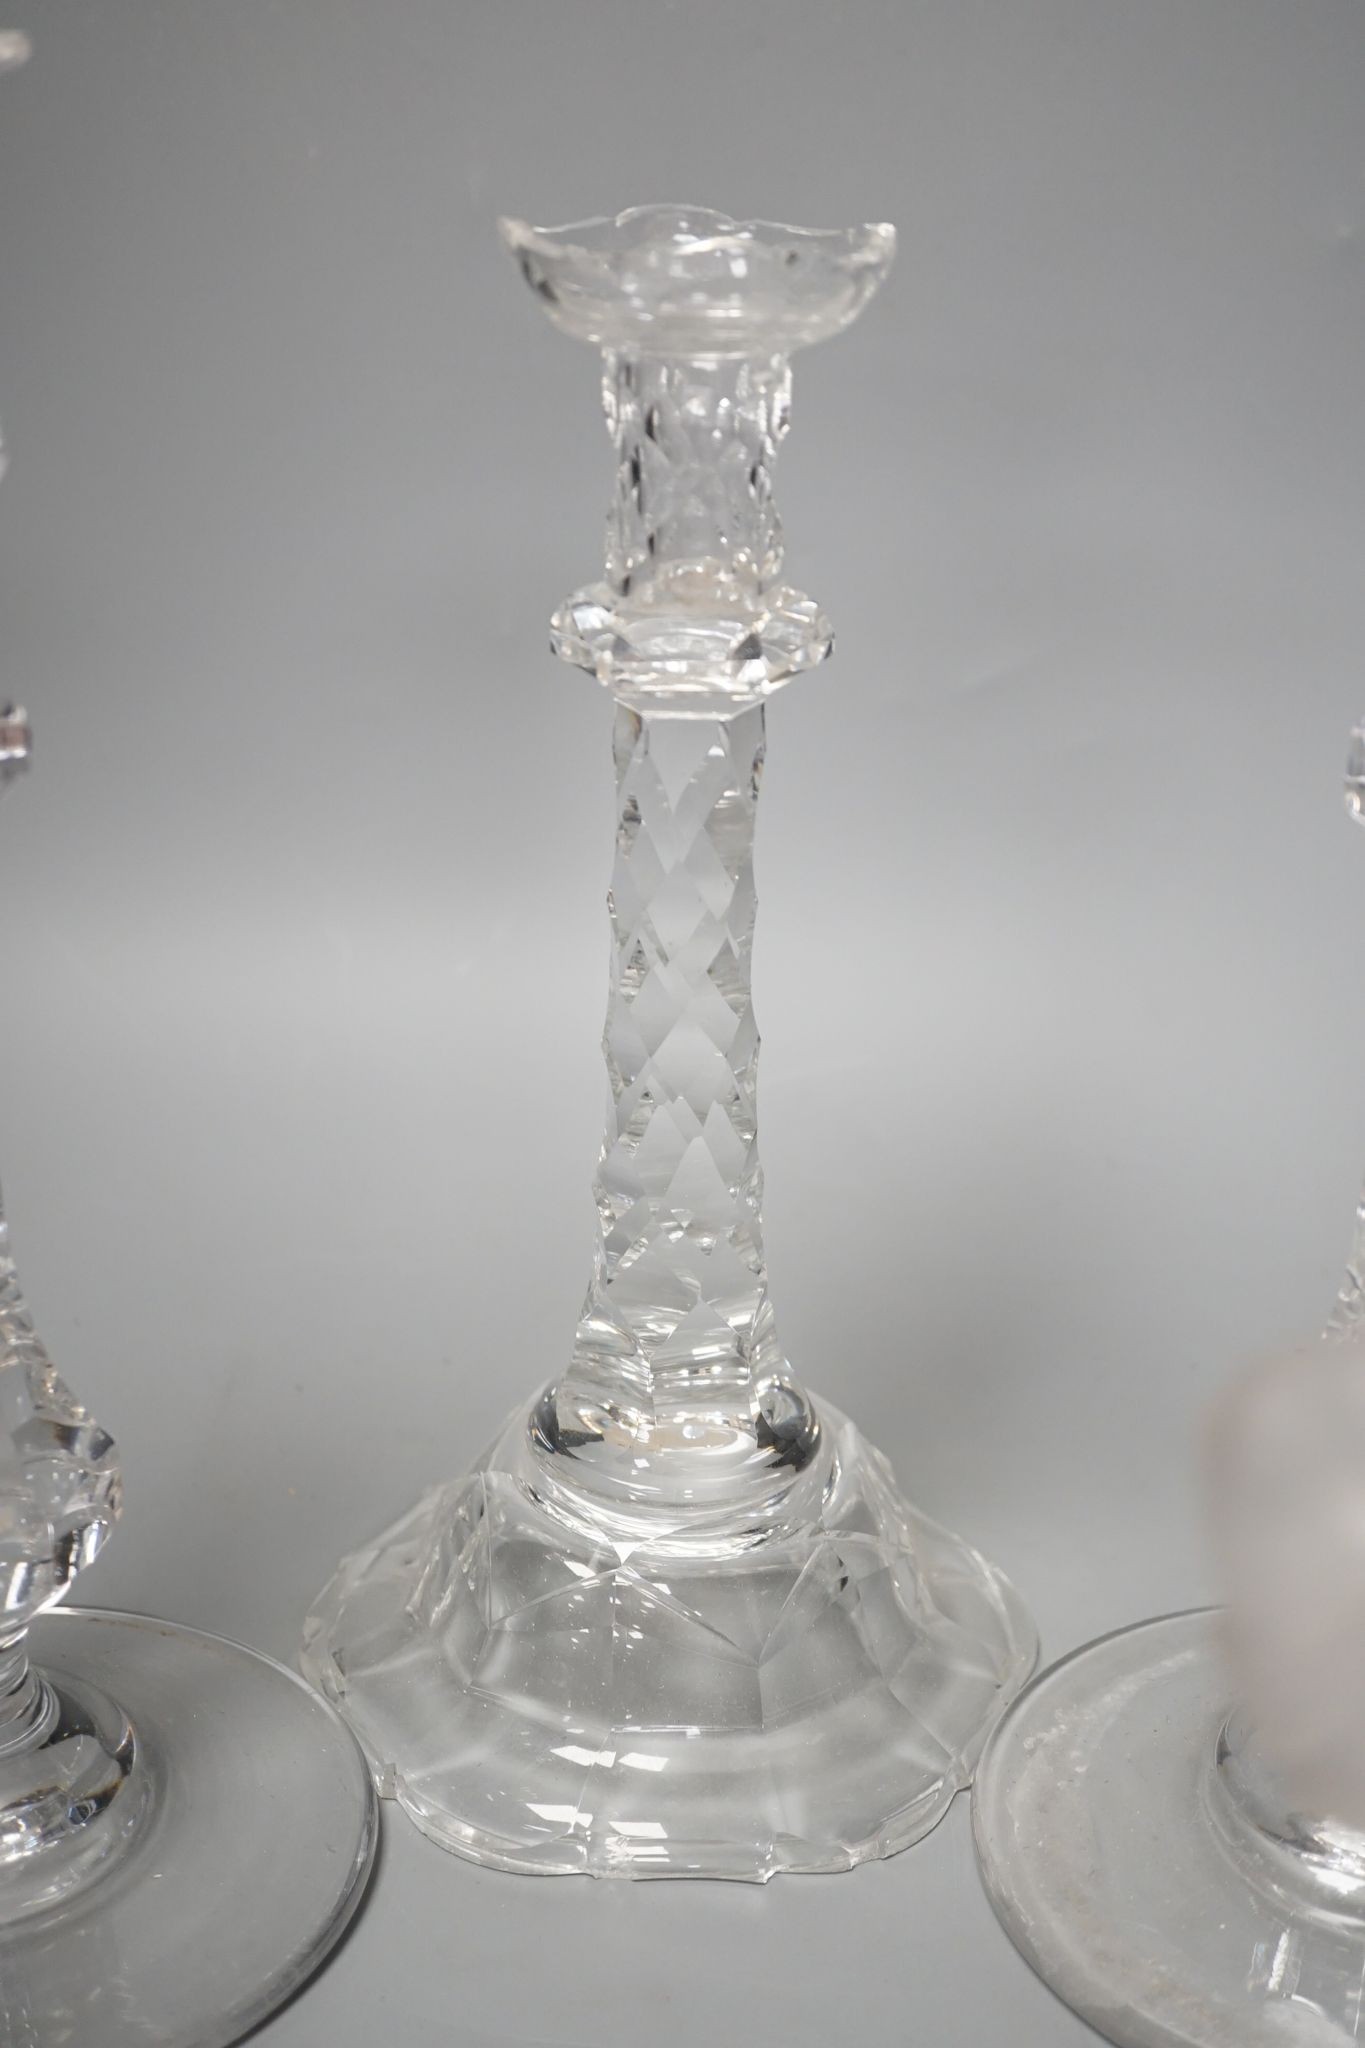 Five various cut glass candlesticks, a pair of John Ford, Holyrood Glass Works, Edinburgh figural frosted glass candlesticks and a lustre drop bag chandelier